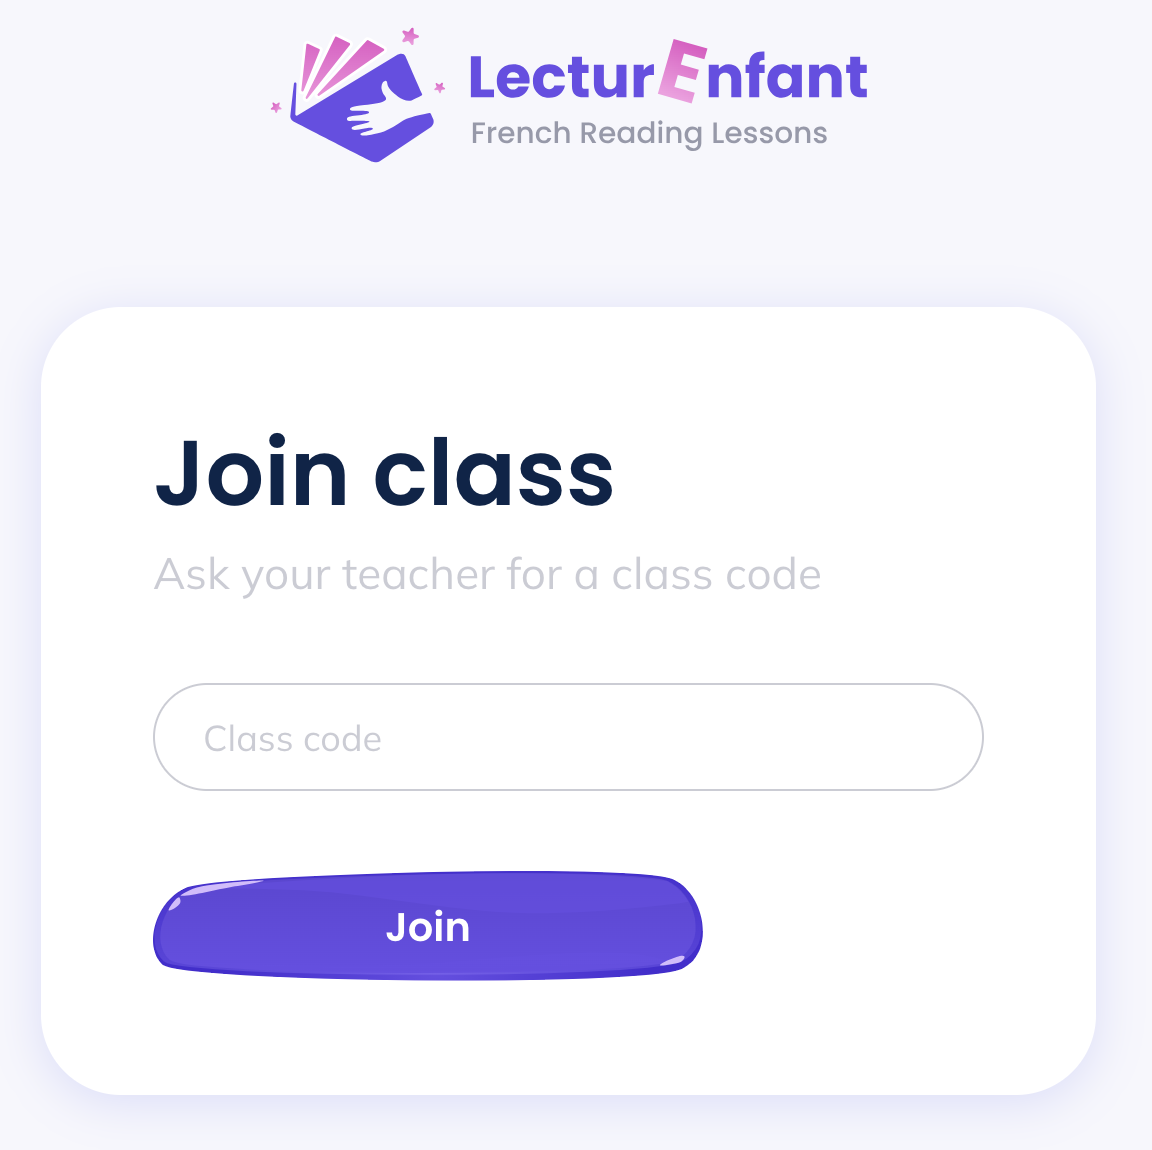 Student login begins here with student entering classroom code provided by the teacher.